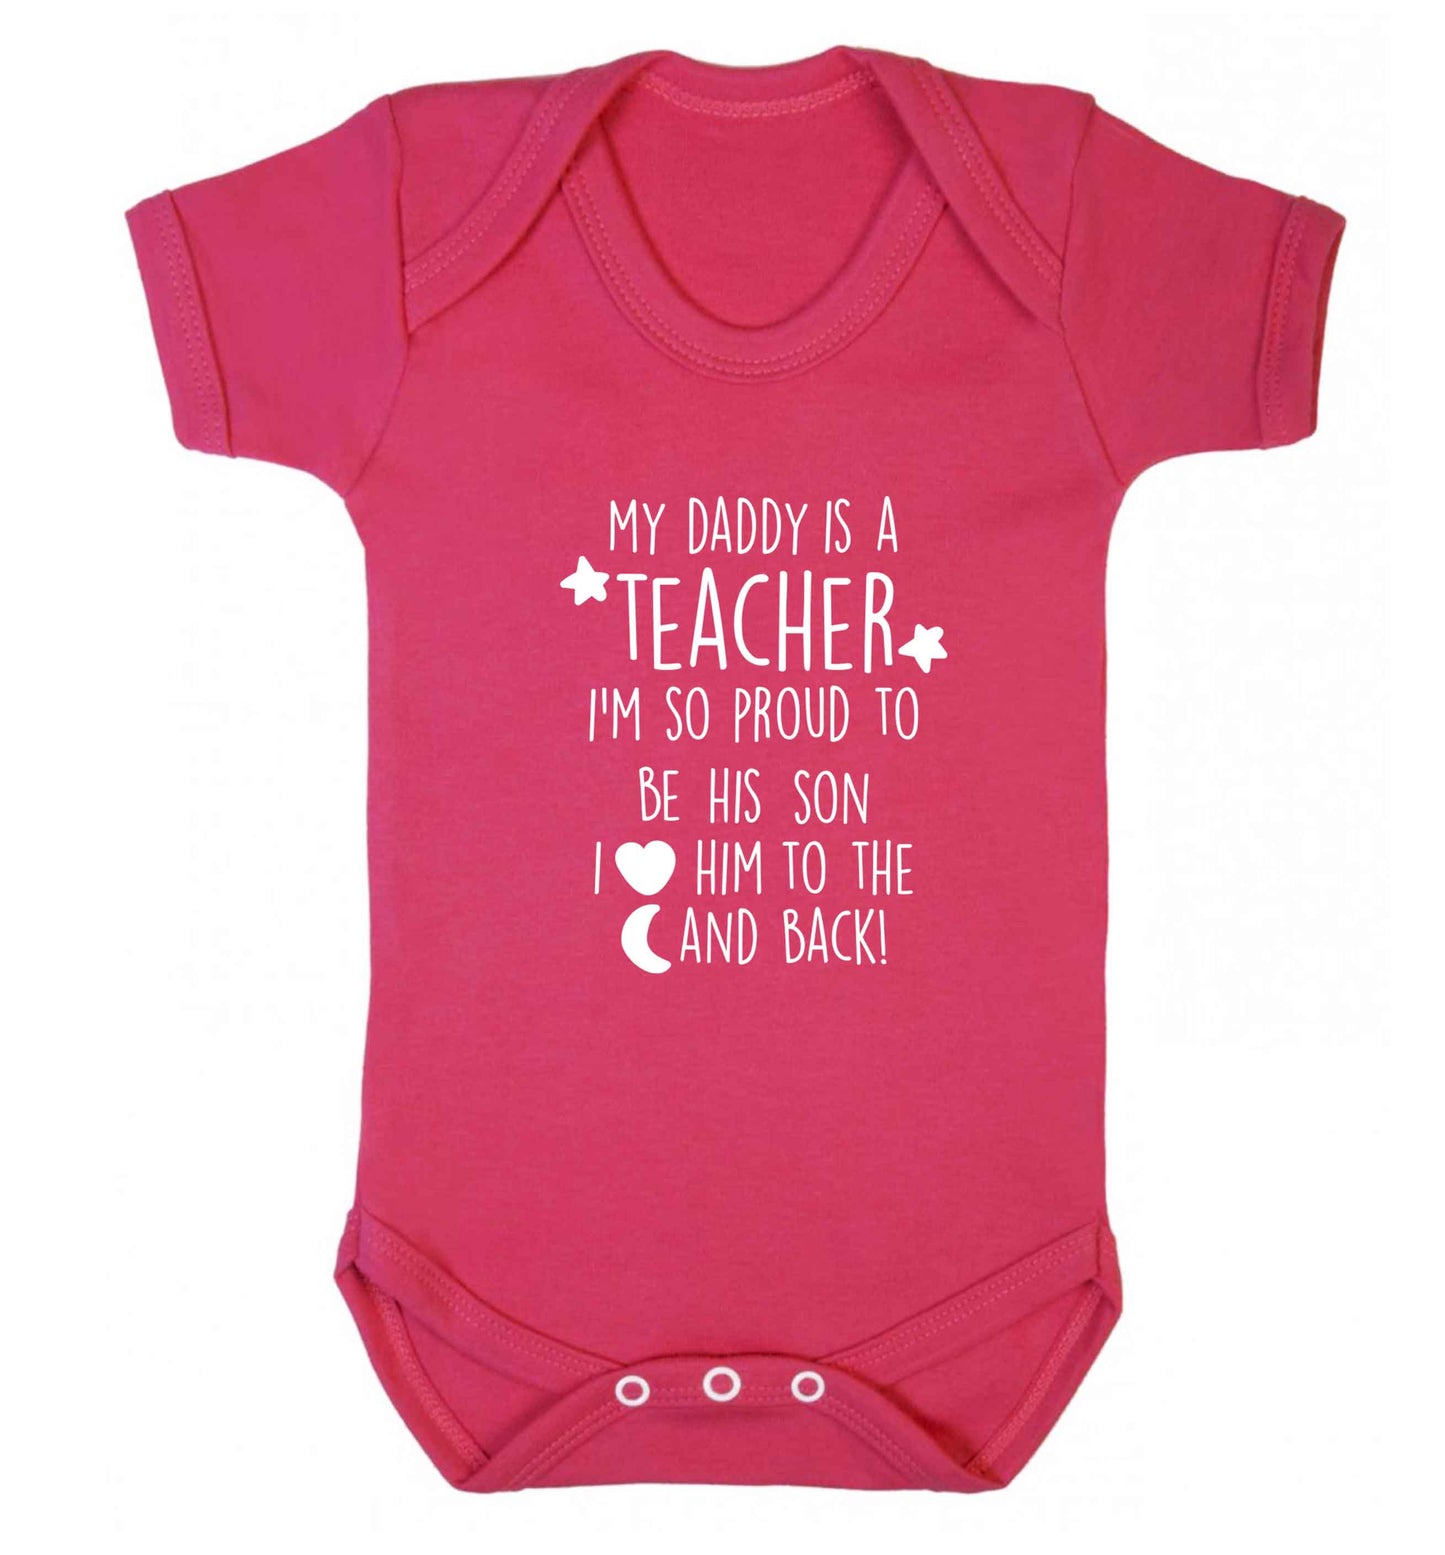 My daddy is a teacher I'm so proud to be his son I love her to the moon and back baby vest dark pink 18-24 months